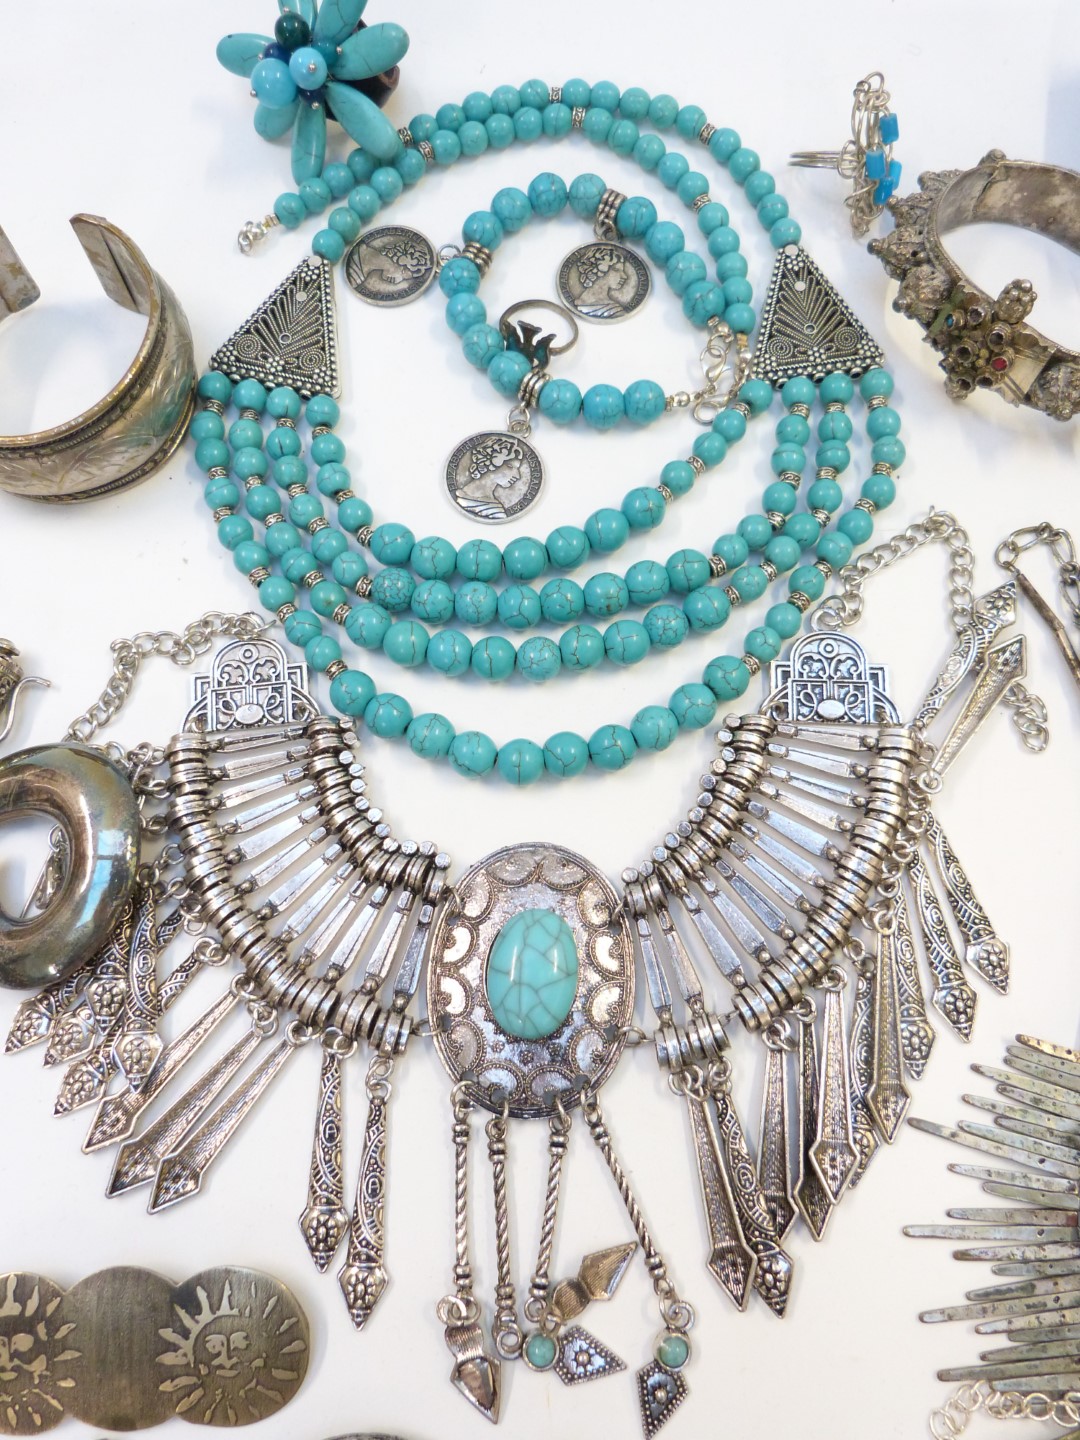 A collection of costume jewellery including necklaces, earrings, bangles, etc - Image 2 of 9